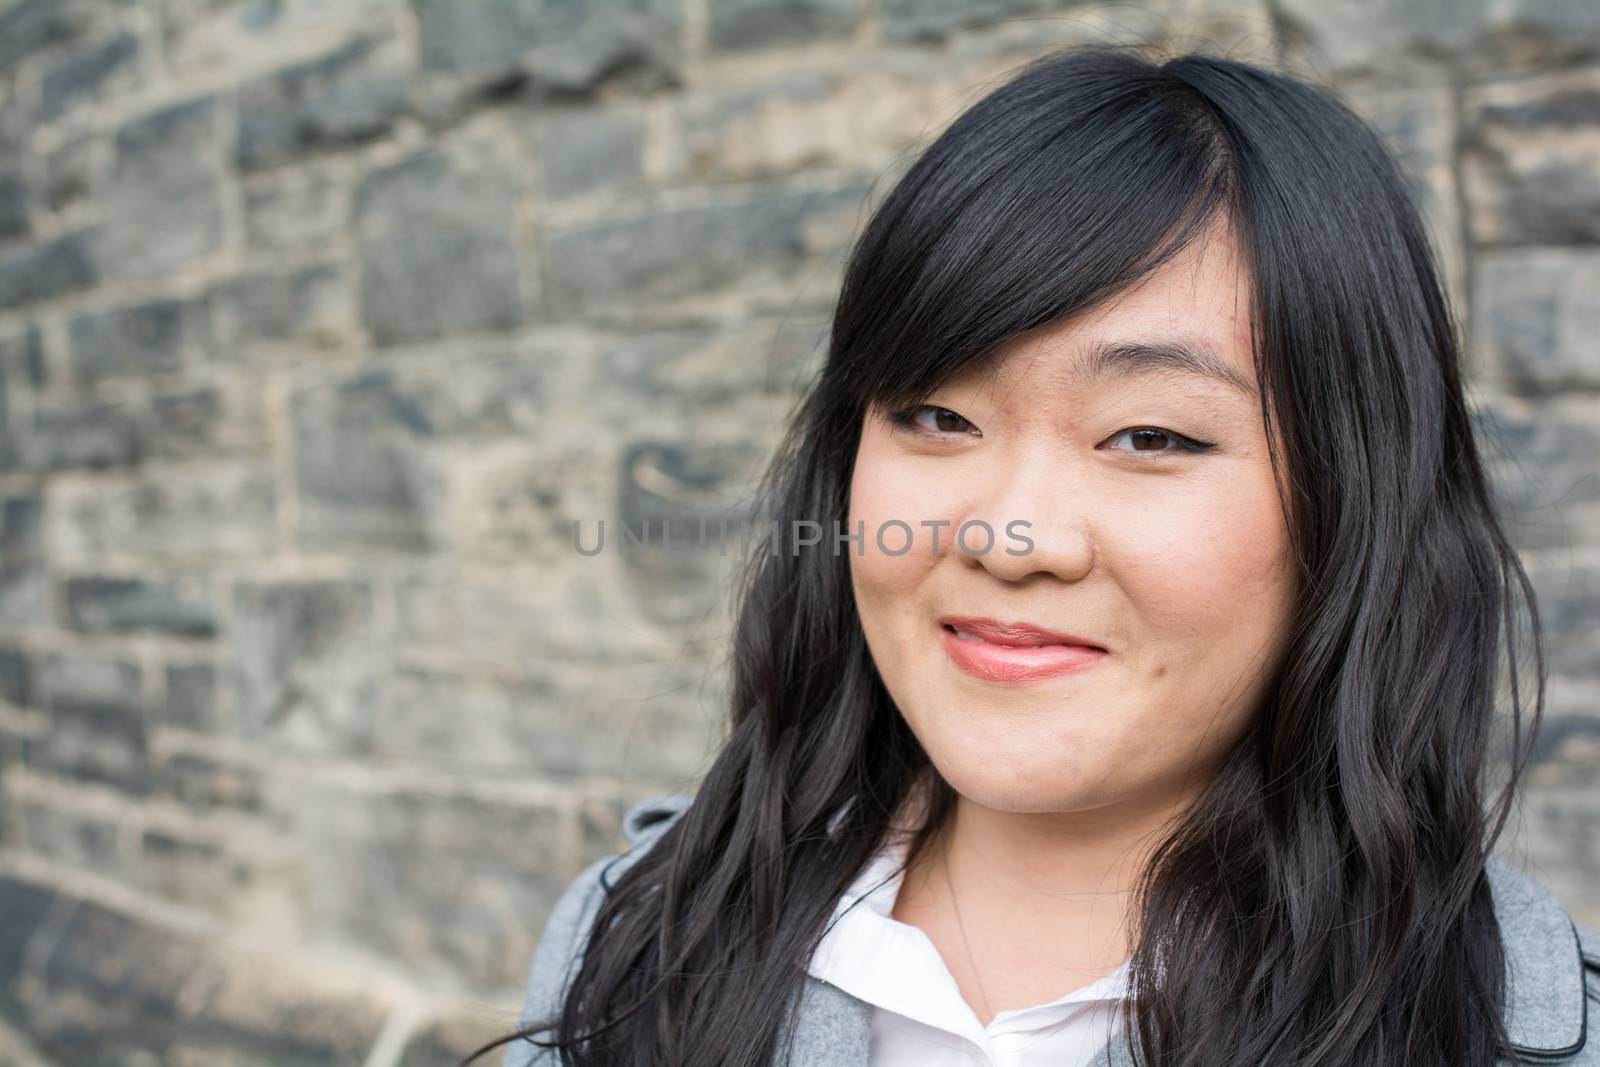 Portrait of beautiful young girl in front of a stone wall looking happy